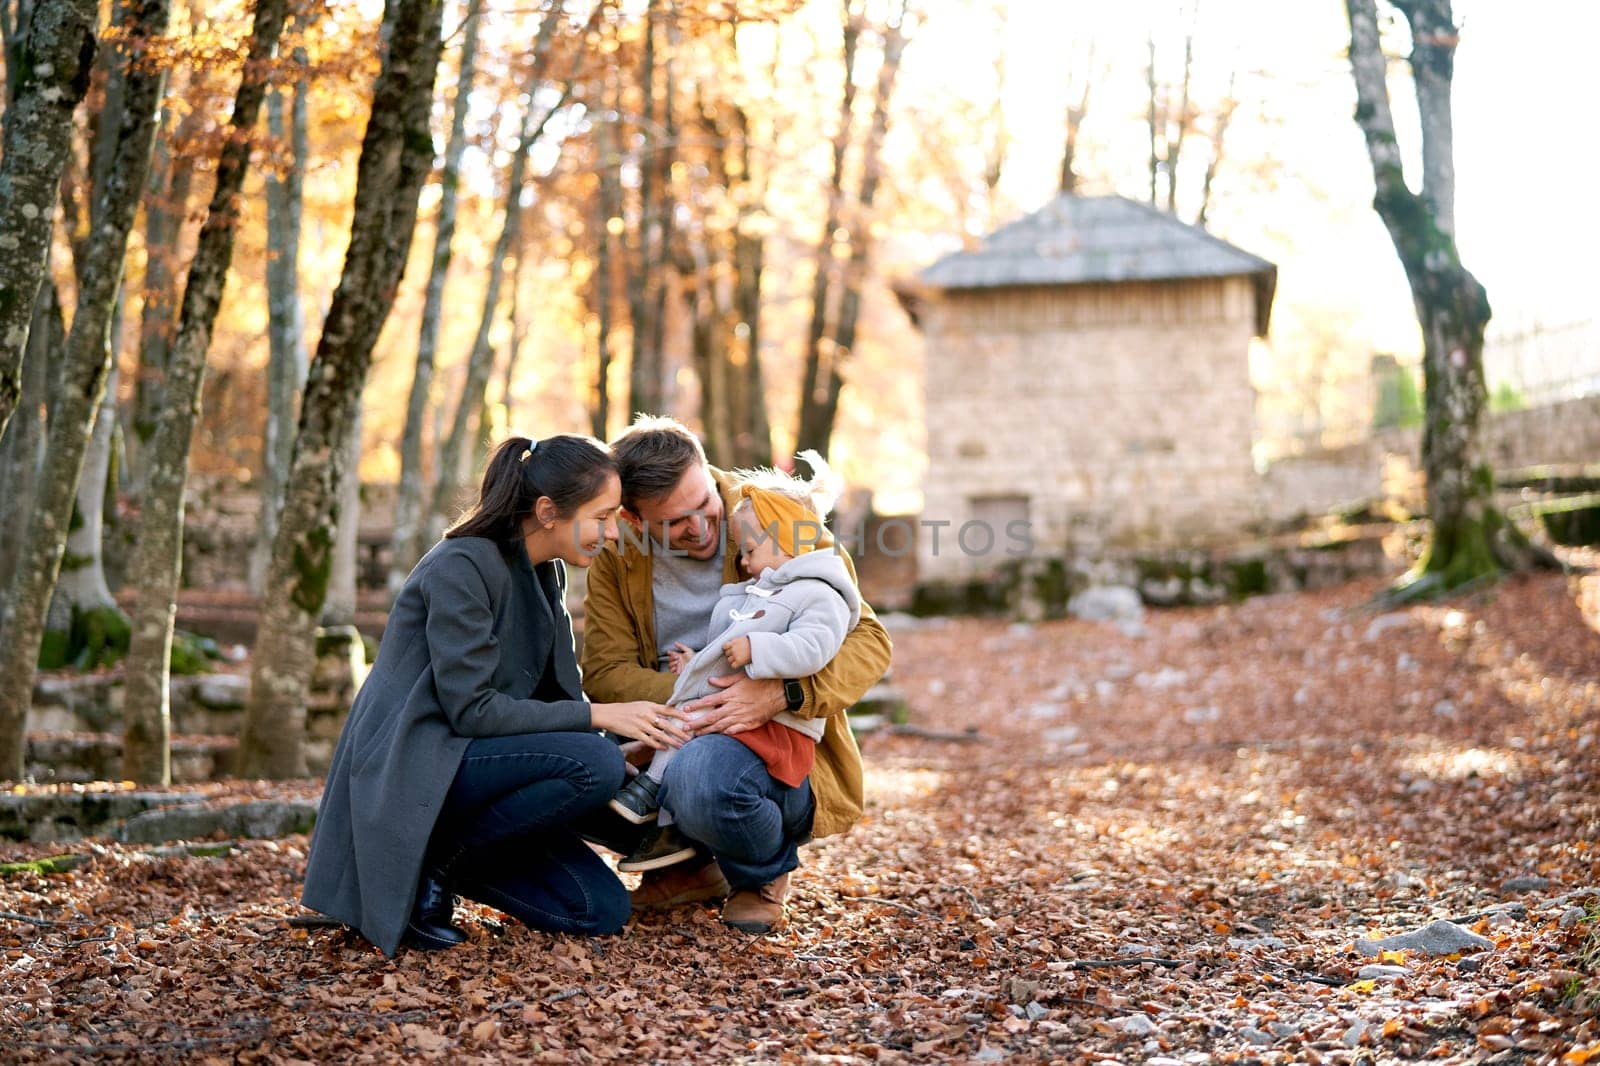 Mom squats and looks at a little girl on her dad lap in an autumn park. High quality photo